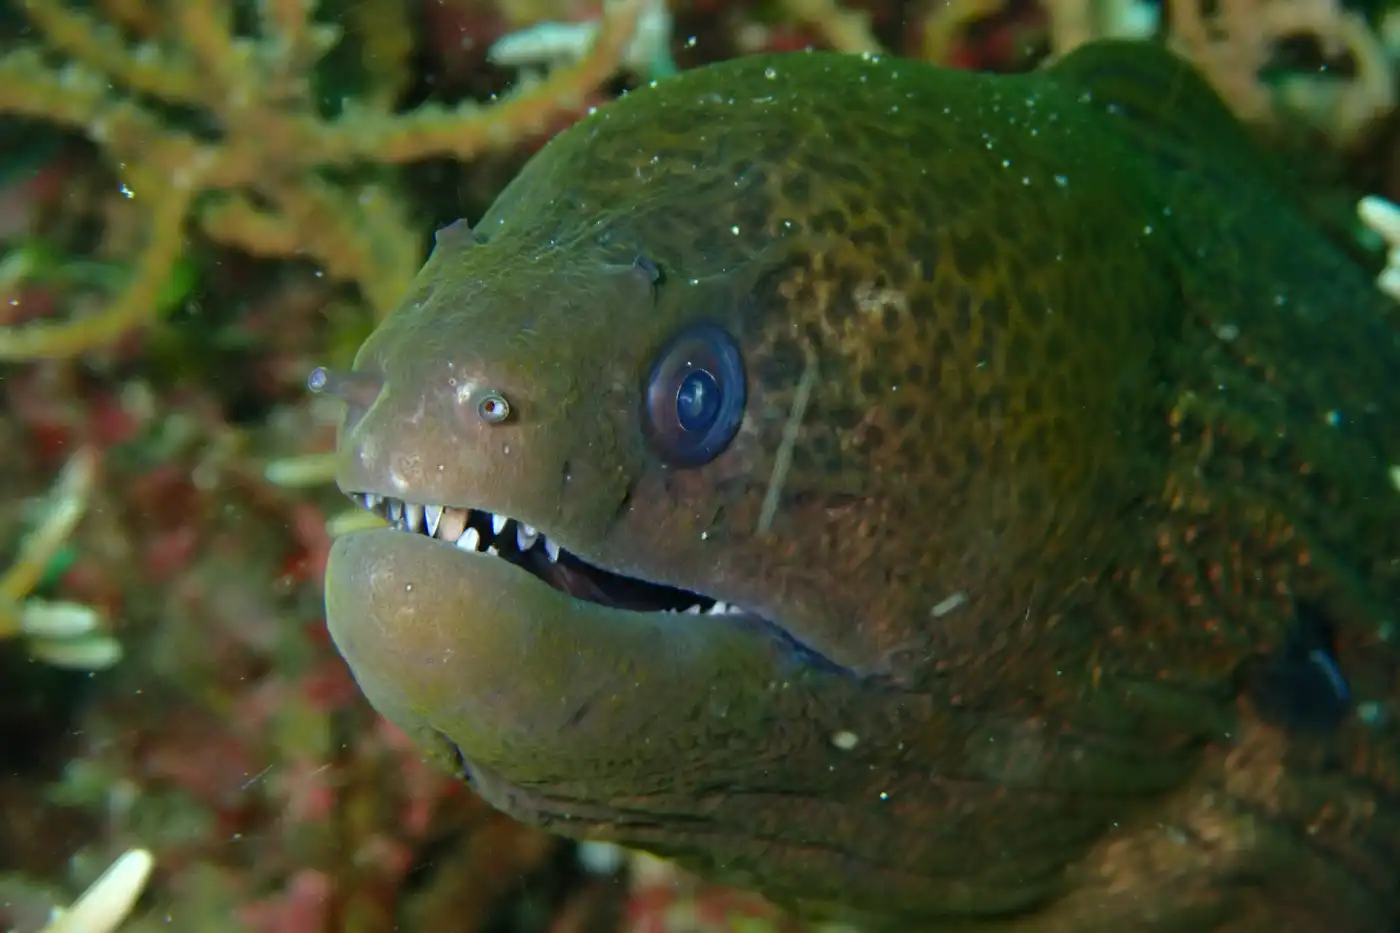 Close-up of a moray eel with sharp teeth and vibrant blue eyes in its natural habitat, showcasing Sabah's diverse marine life.